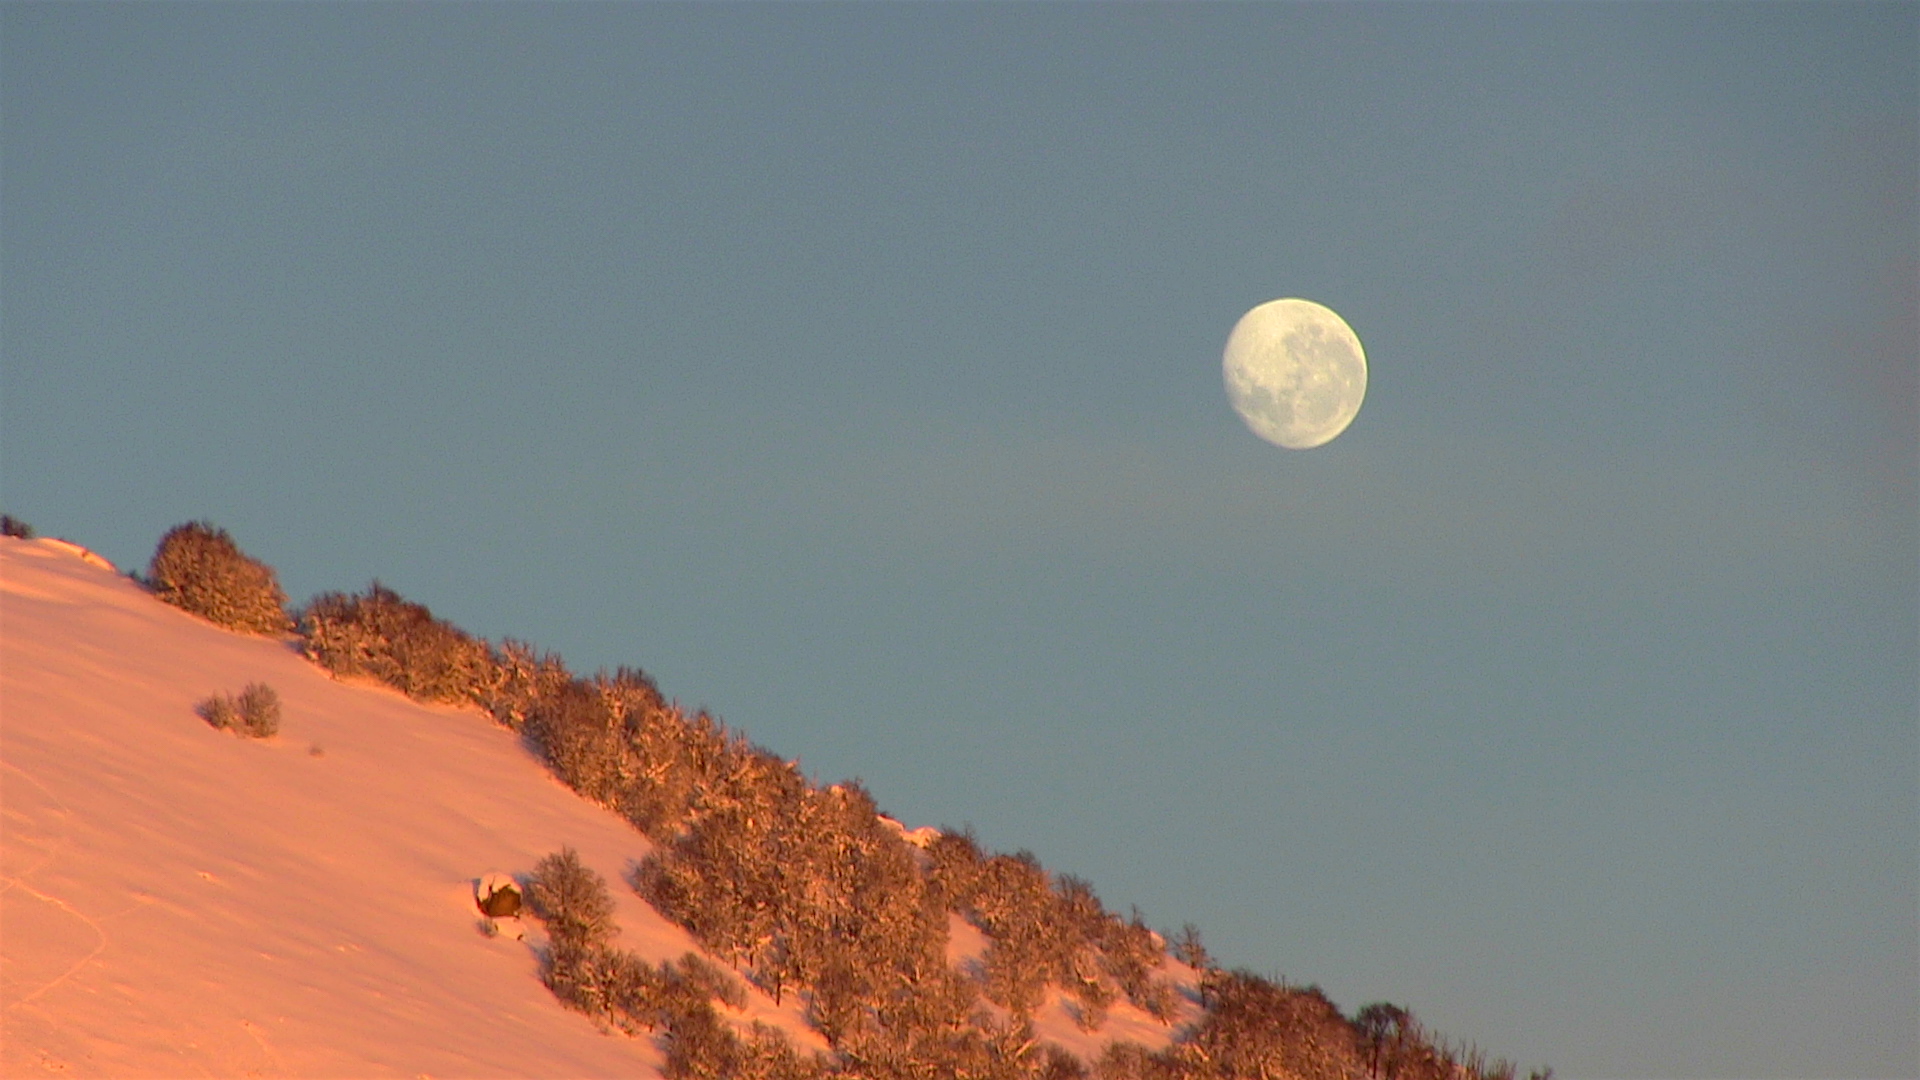 Moonset and Cerro Catedral in Bariloche on August 21st, 2016. photo: snowbrains